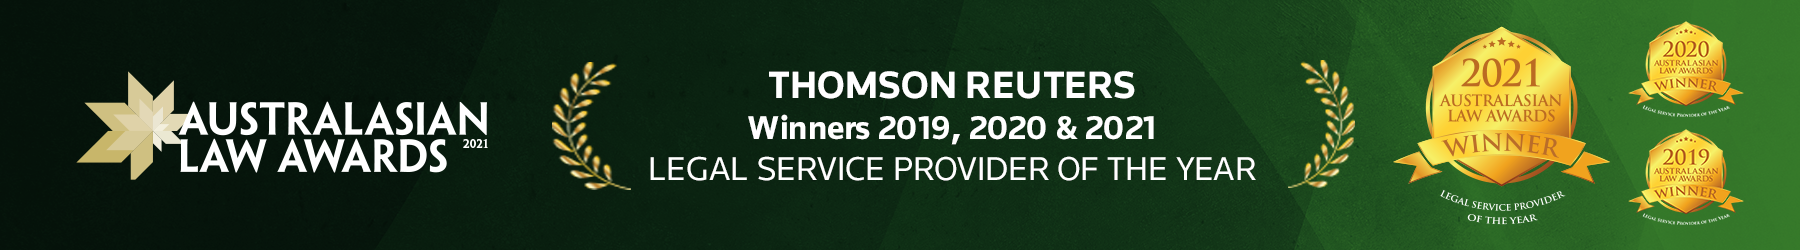 Thomson Reuters - Winners 2019,2020 & 2021 - Legal service provider of the year